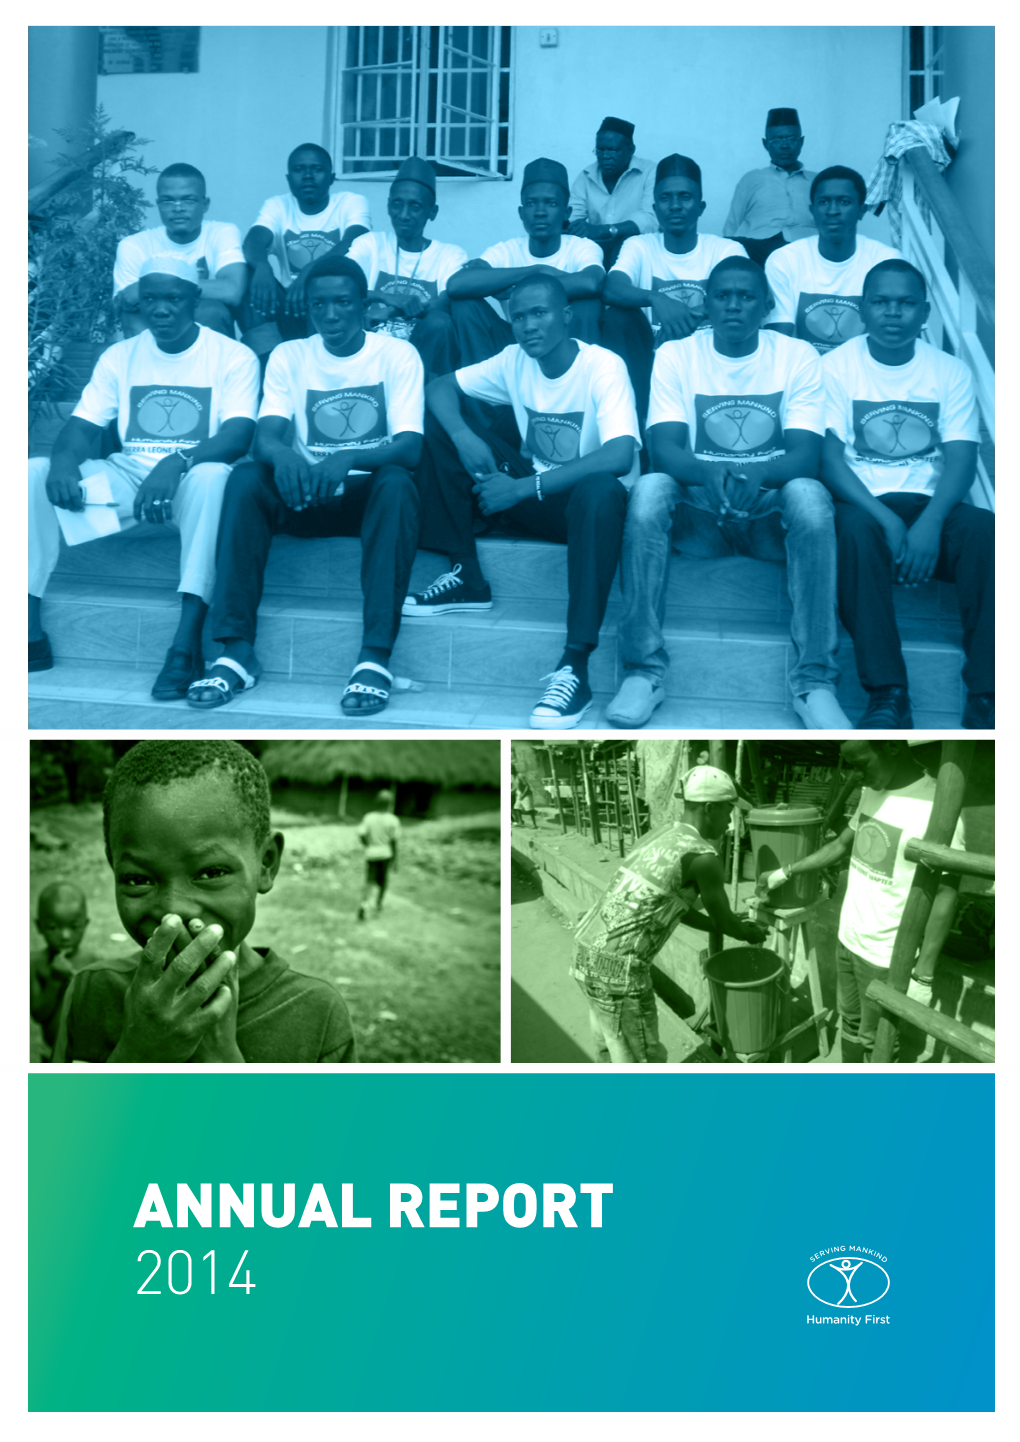 Annual Report 2014 2 HUMANITY FIRST 2014 HUMANITY FIRST 2014 3